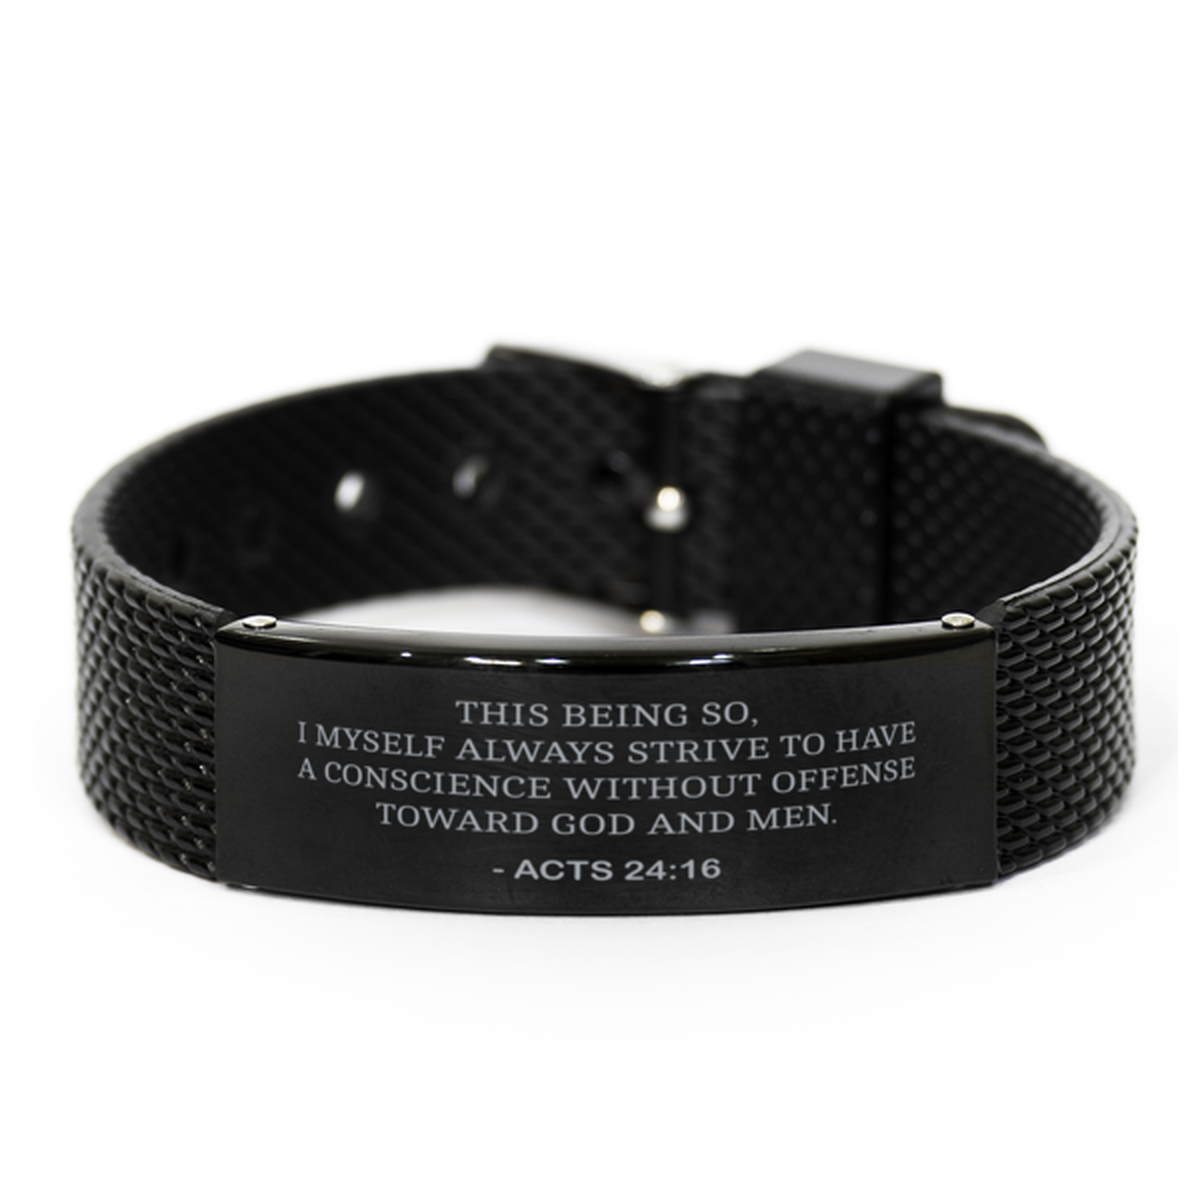 Christian Black Bracelet,, Acts 24:16 This Being So, I Myself Always Strive To Have A, Motivational Bible Verse Gifts For Men Women